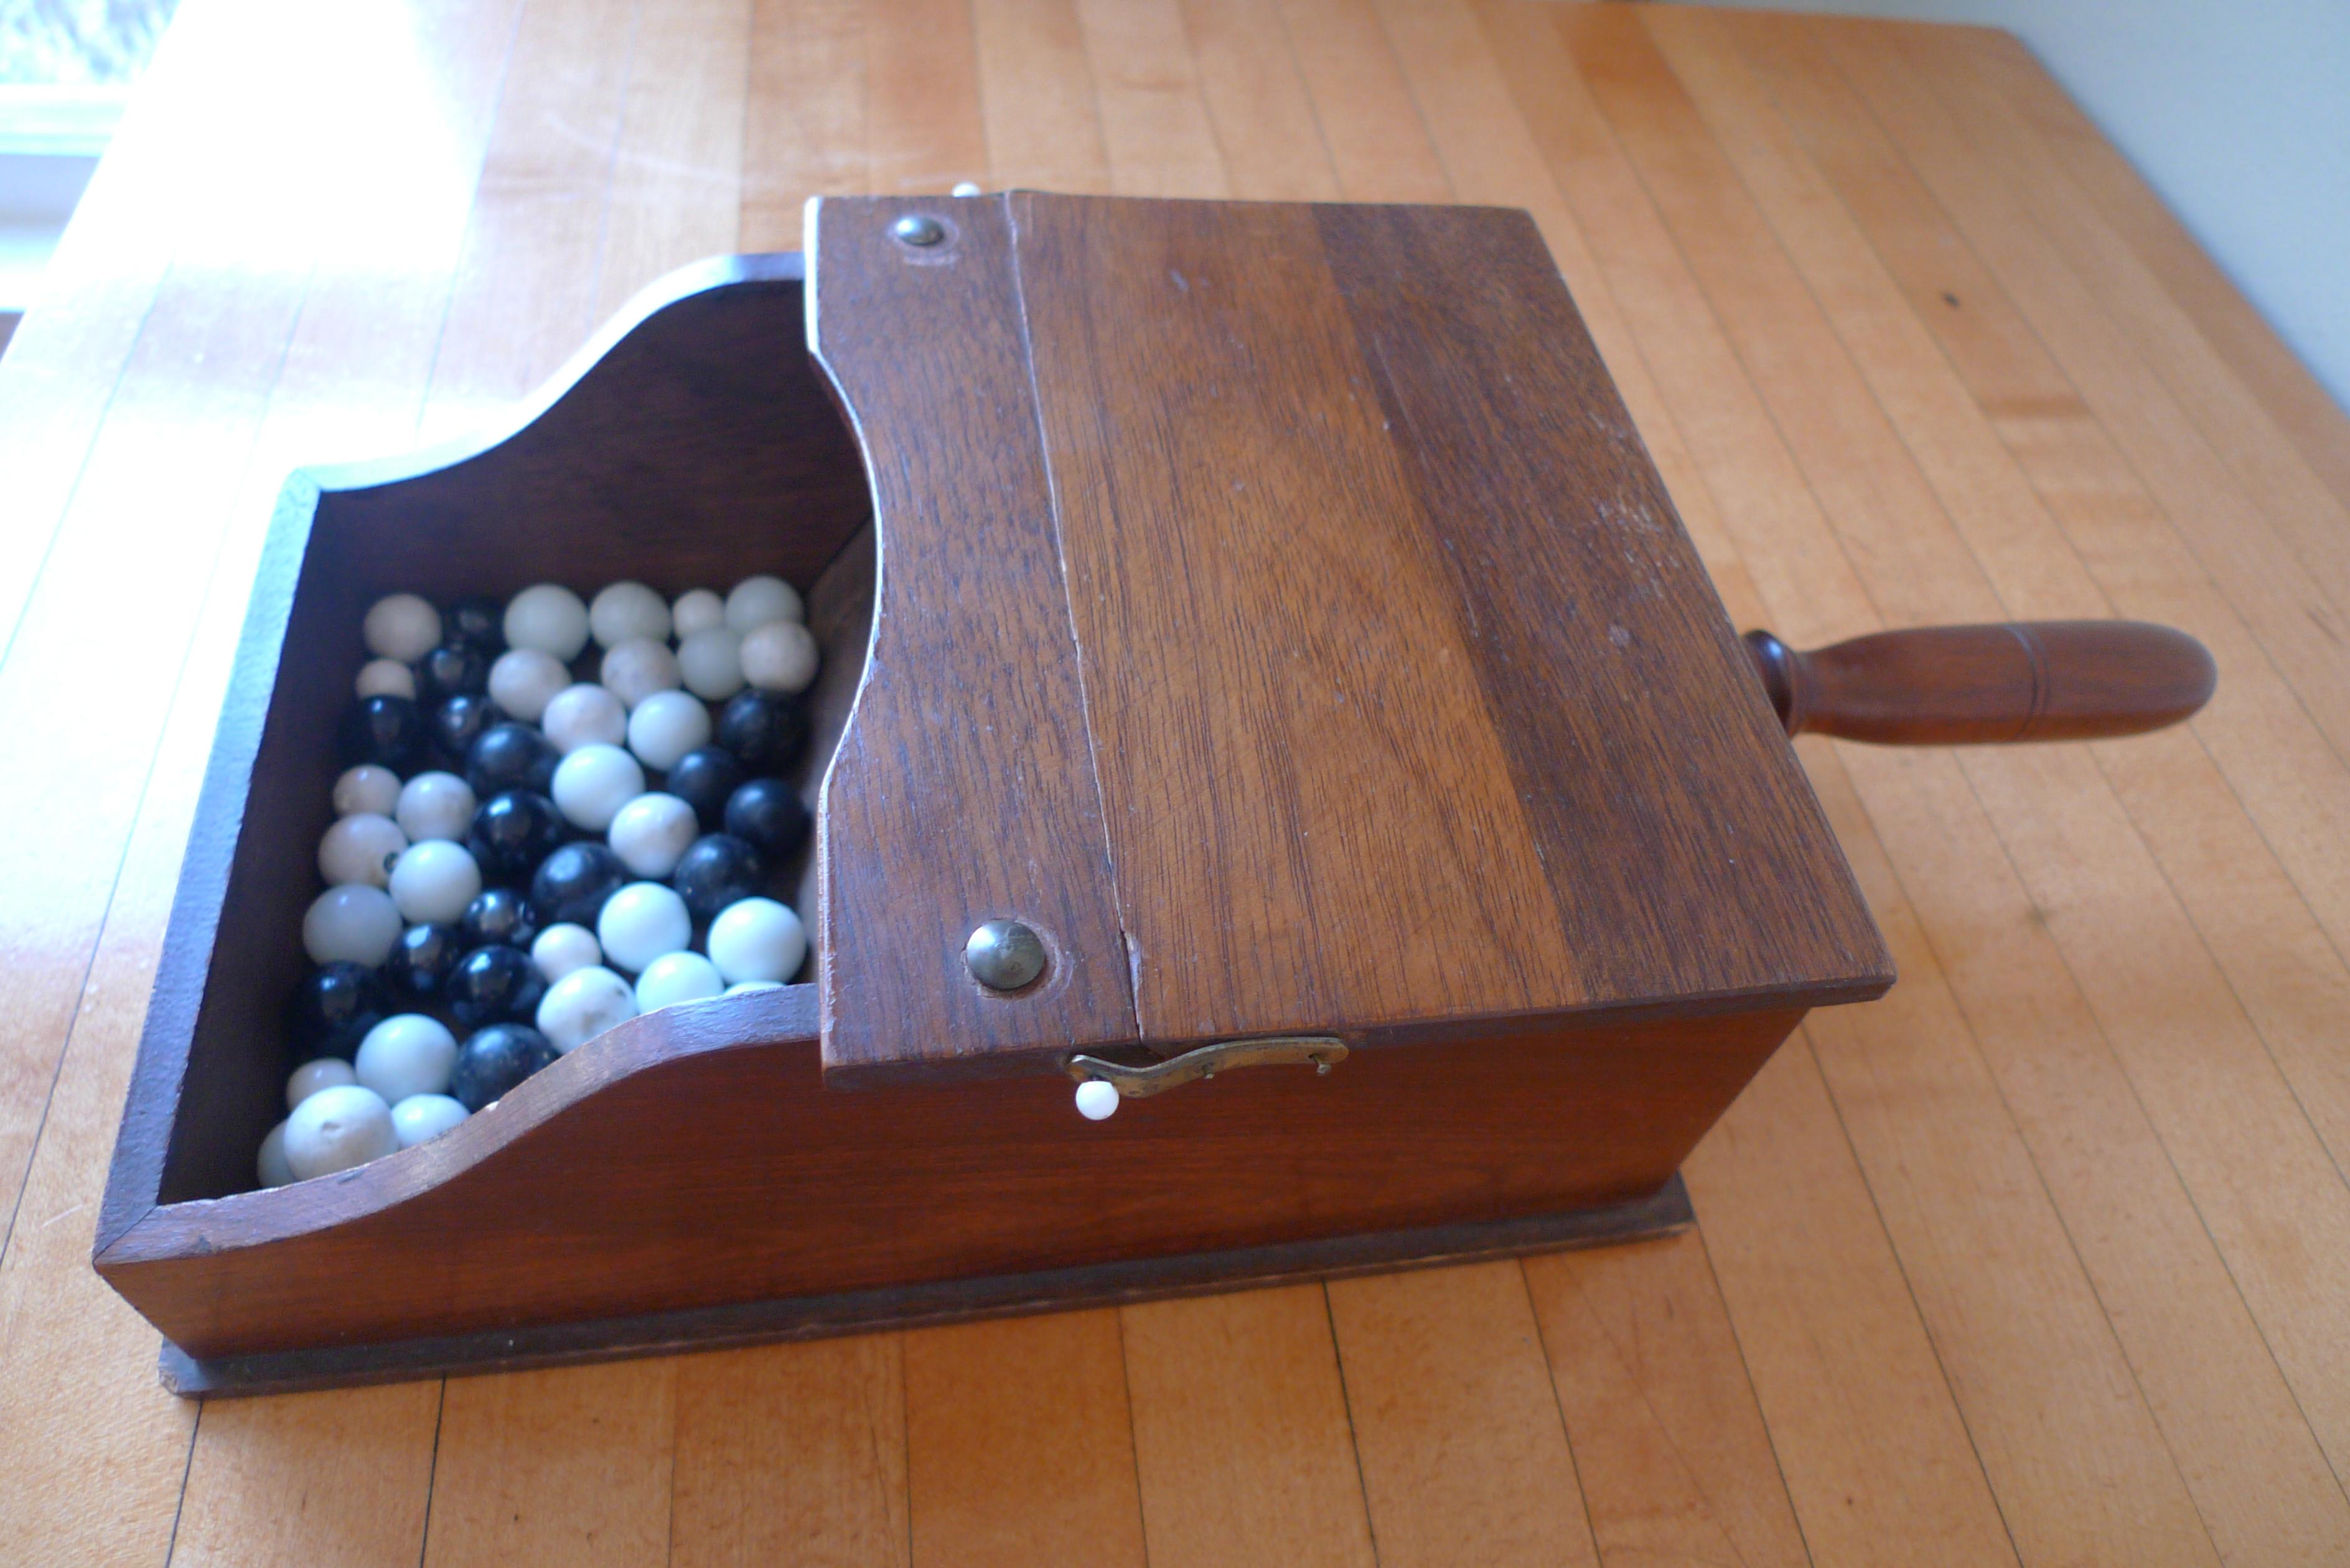 Ballot box with white and black glass balls in hand-held, lidded walnut box. Vote them on or off the island. Perfectly unique, fun, holiday gift.